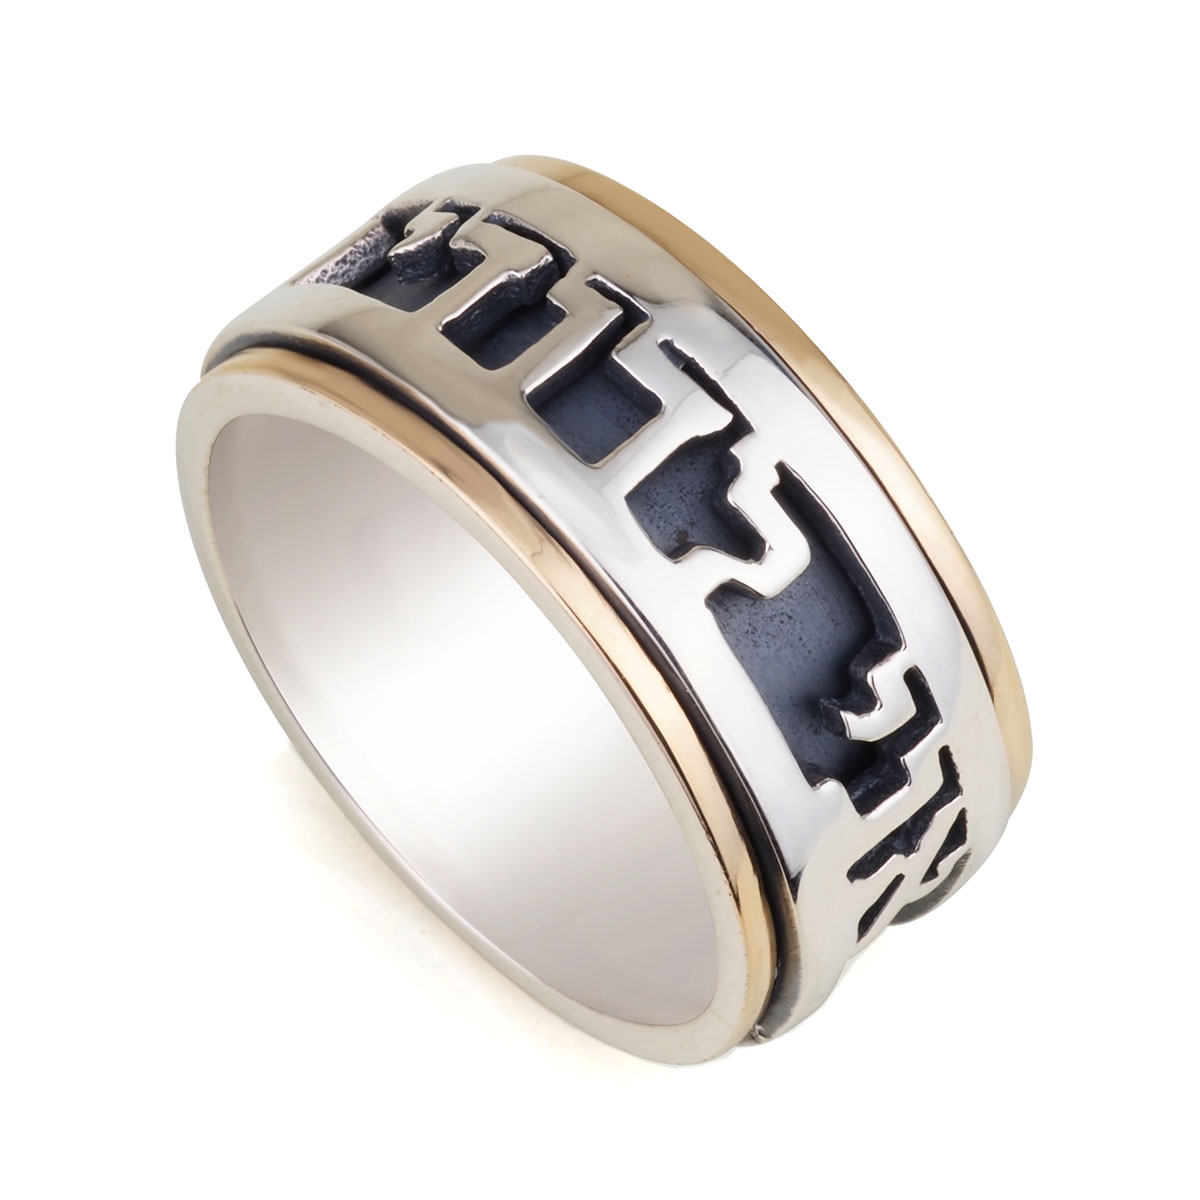 Deluxe Unisex Spinning Silver and 9K Gold Ring with Ani LeDodi - Song of Songs 6:3 - 1